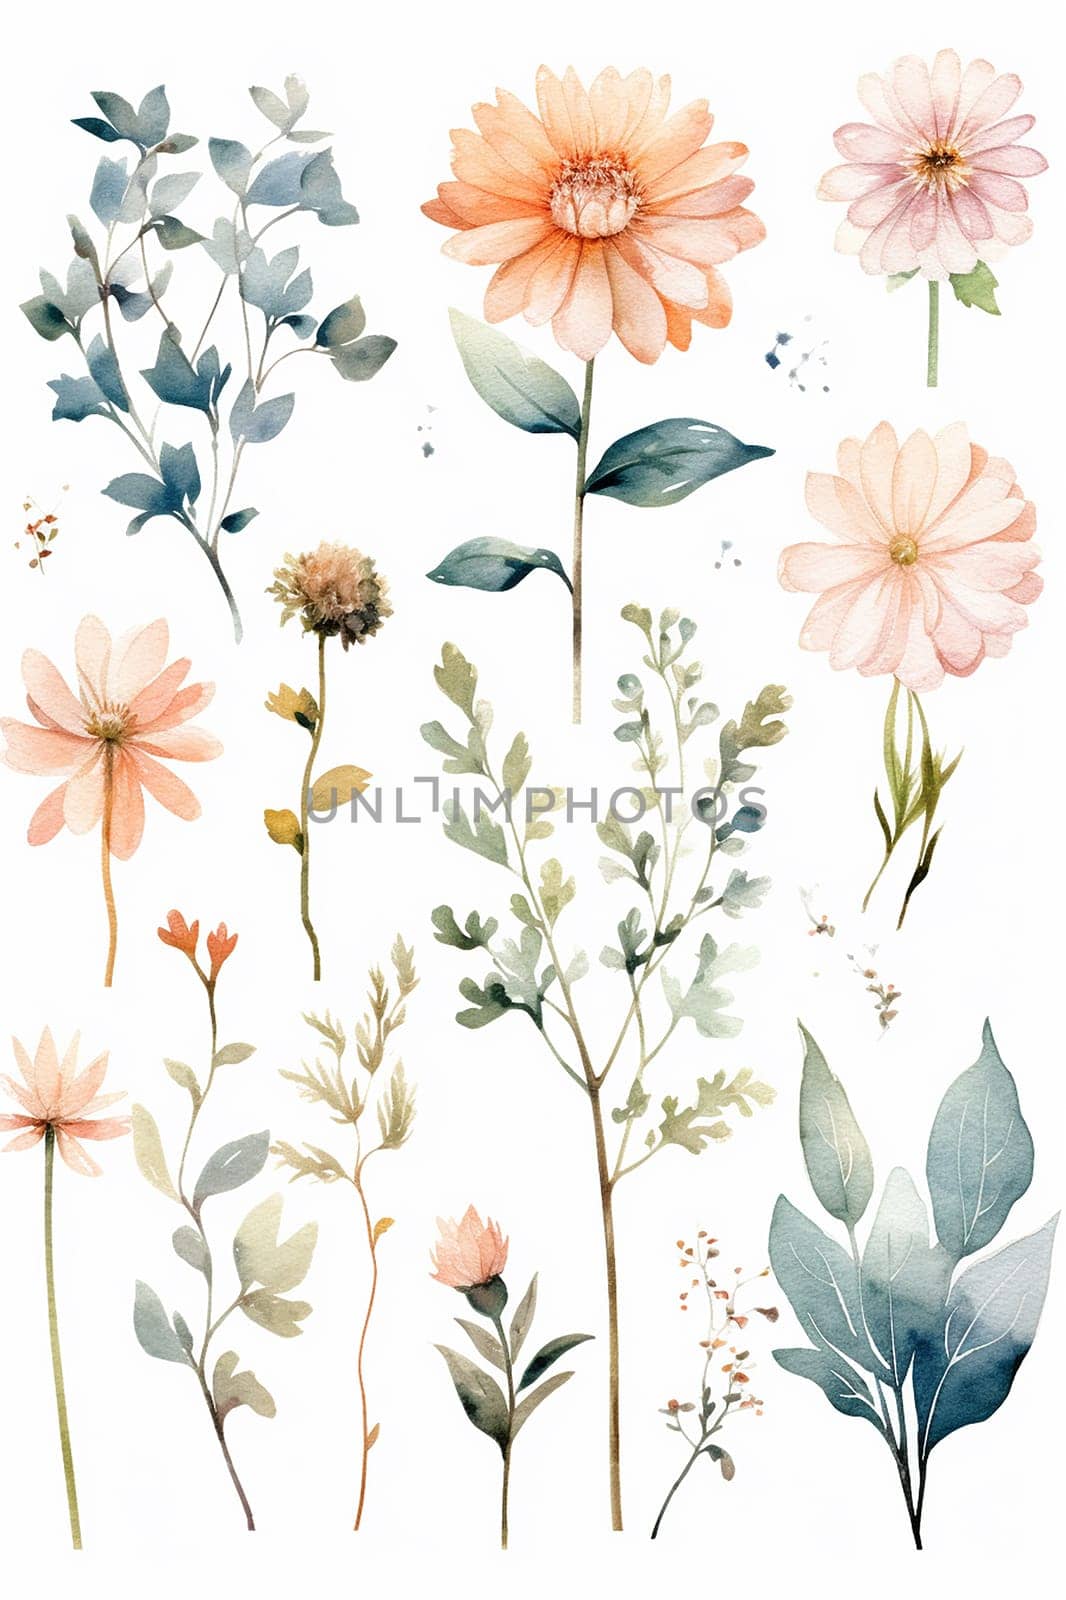 A collection of watercolor flowers and foliage in soft colors